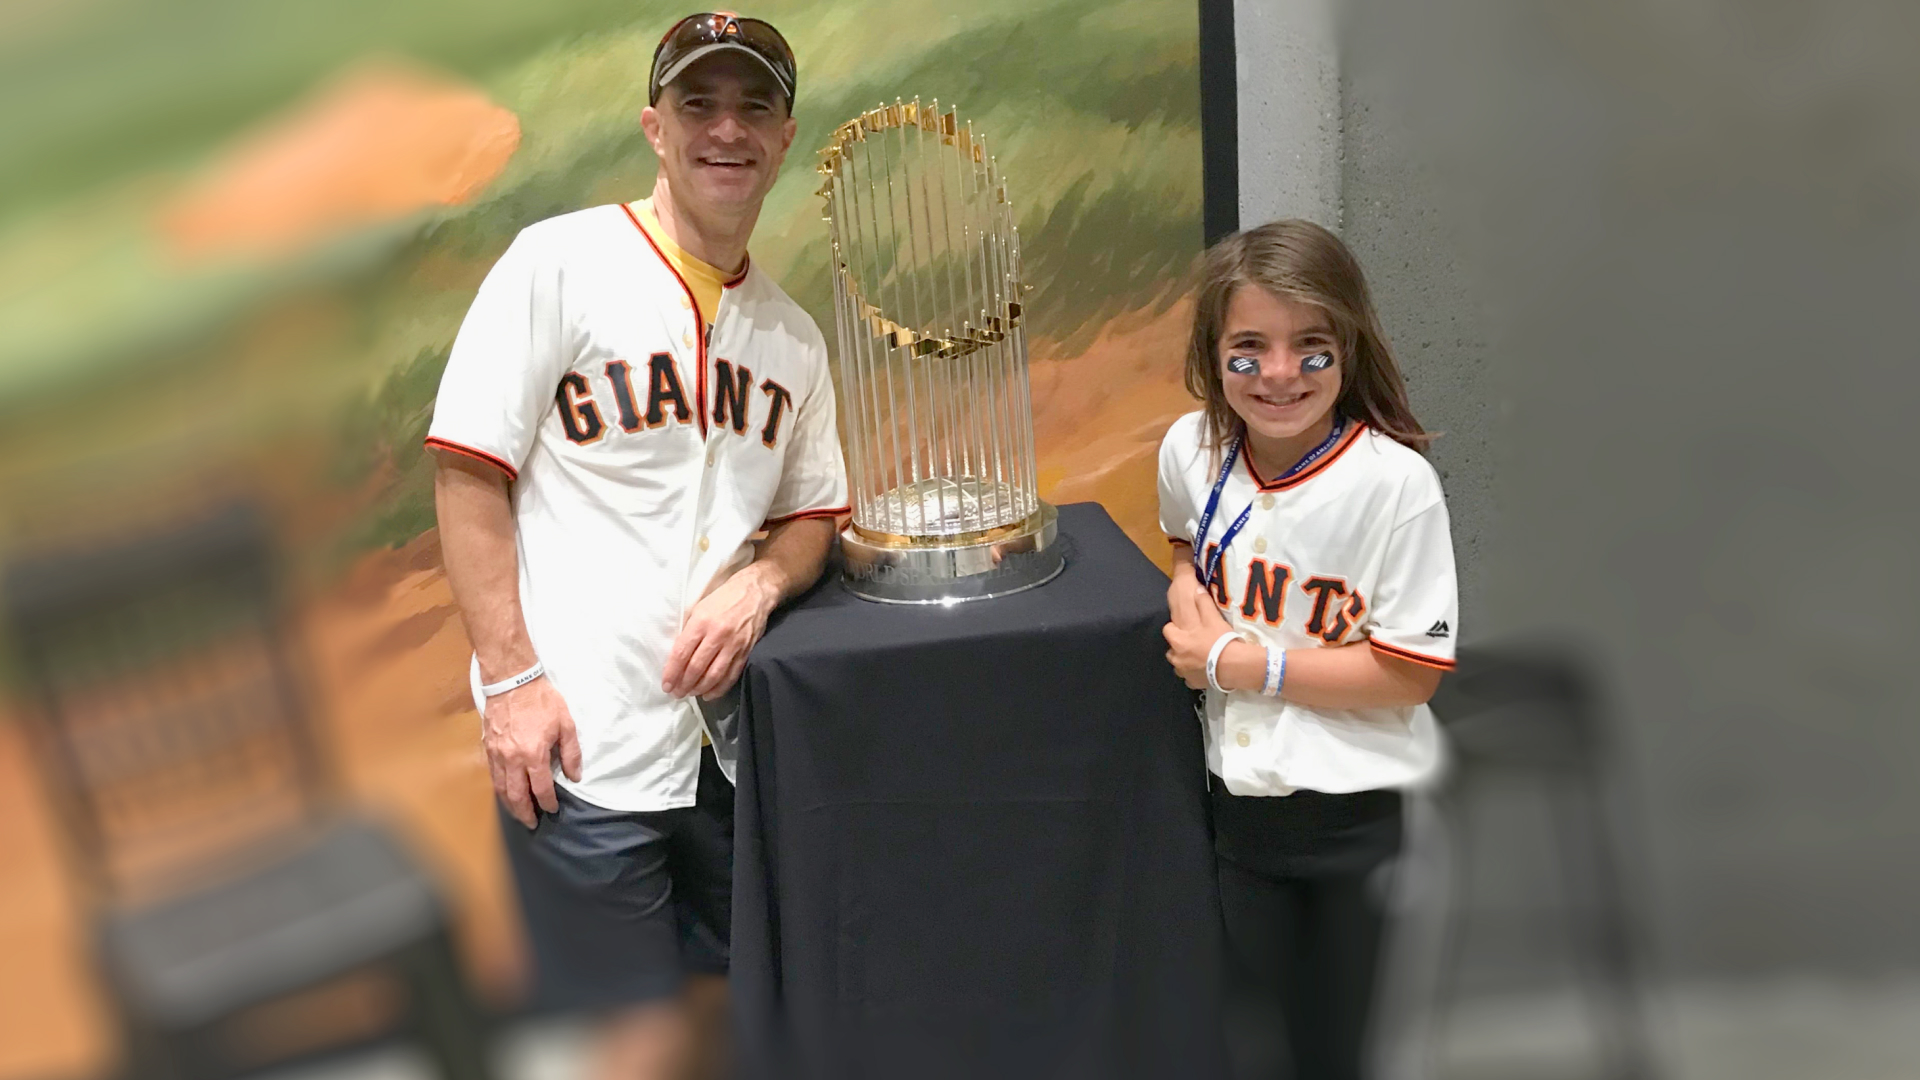 Sebastian and his daughter with the World Series trophy that the San Francisco Giants Major League Baseball team won back in 2014. (Image supplied)